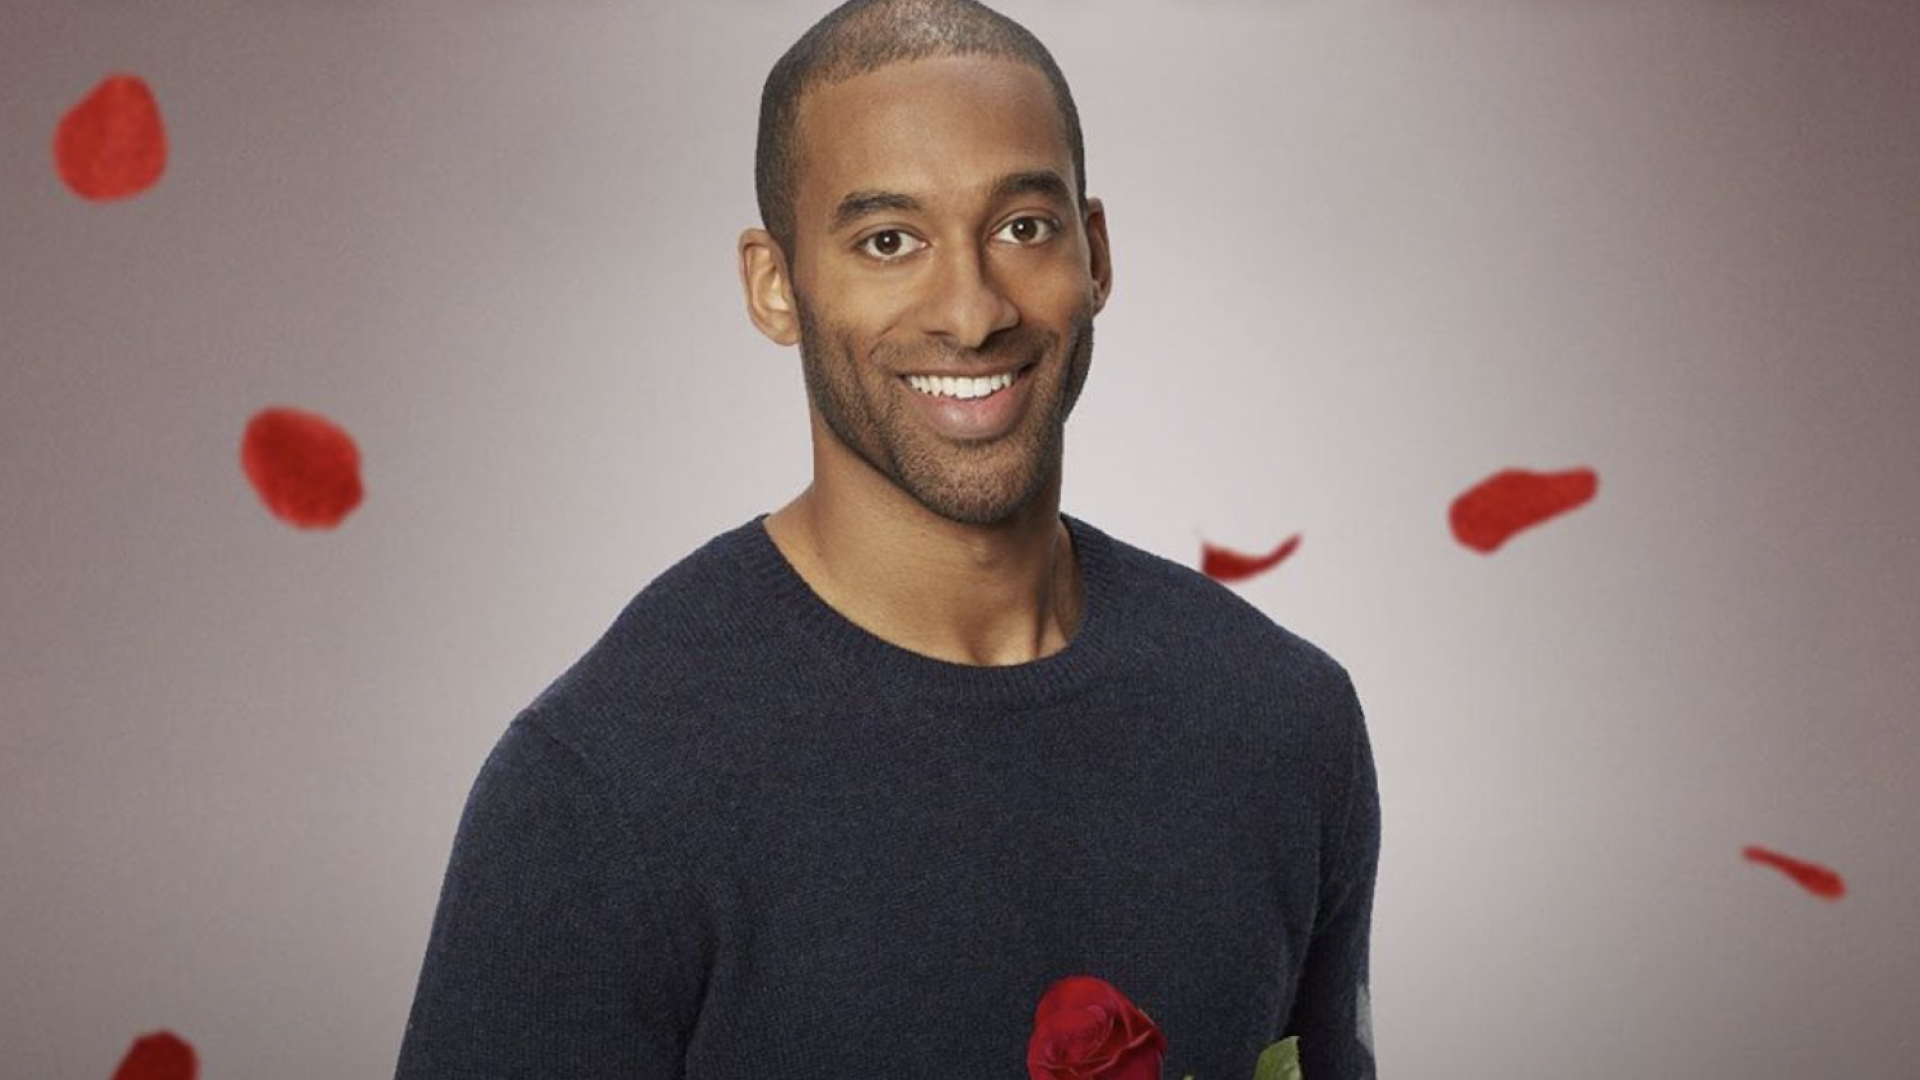 Matt James, The First Black Bachelor, Gets His Season Premiere In January 2021